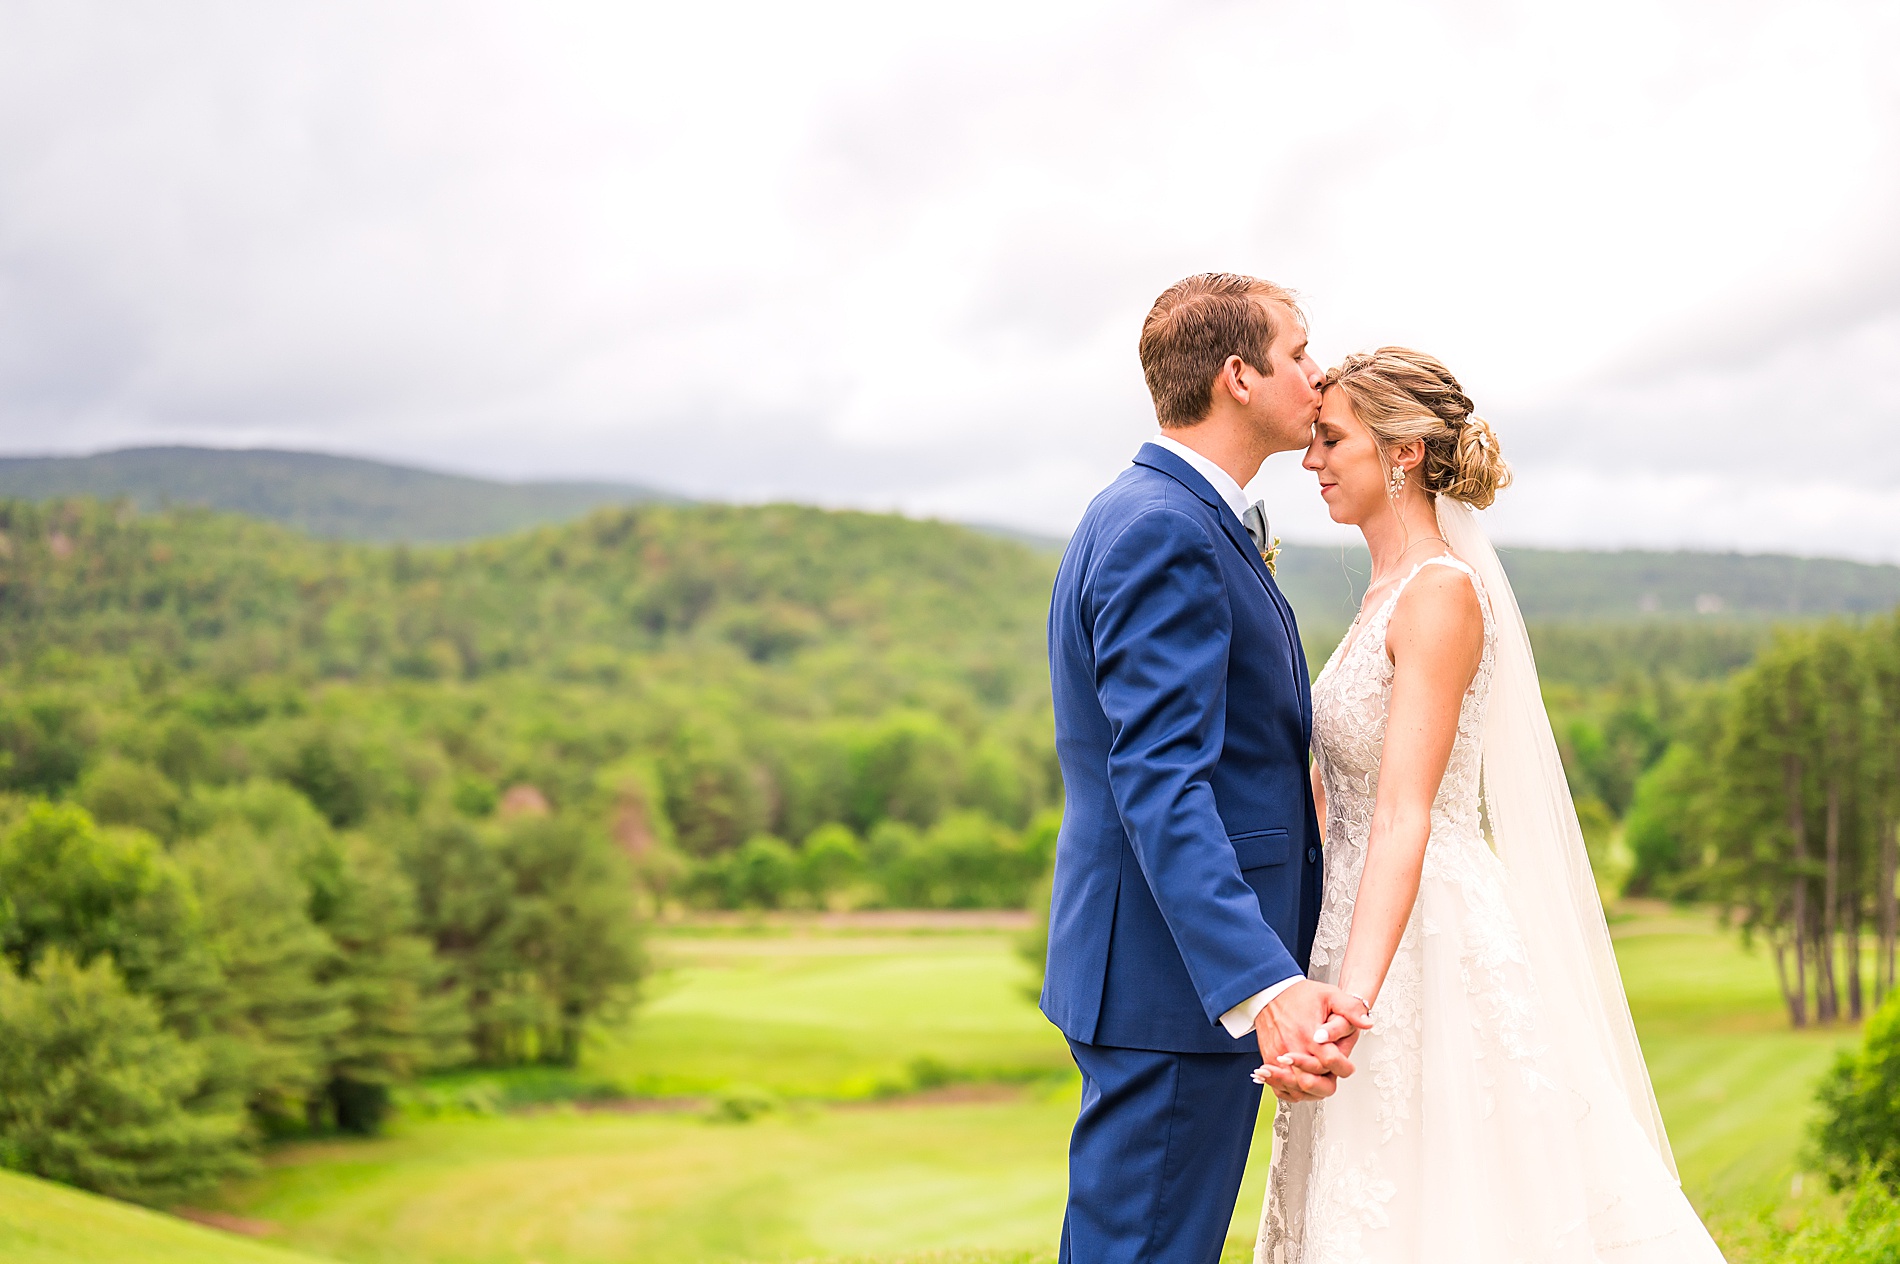 groom kisses bride's forehead during portaits